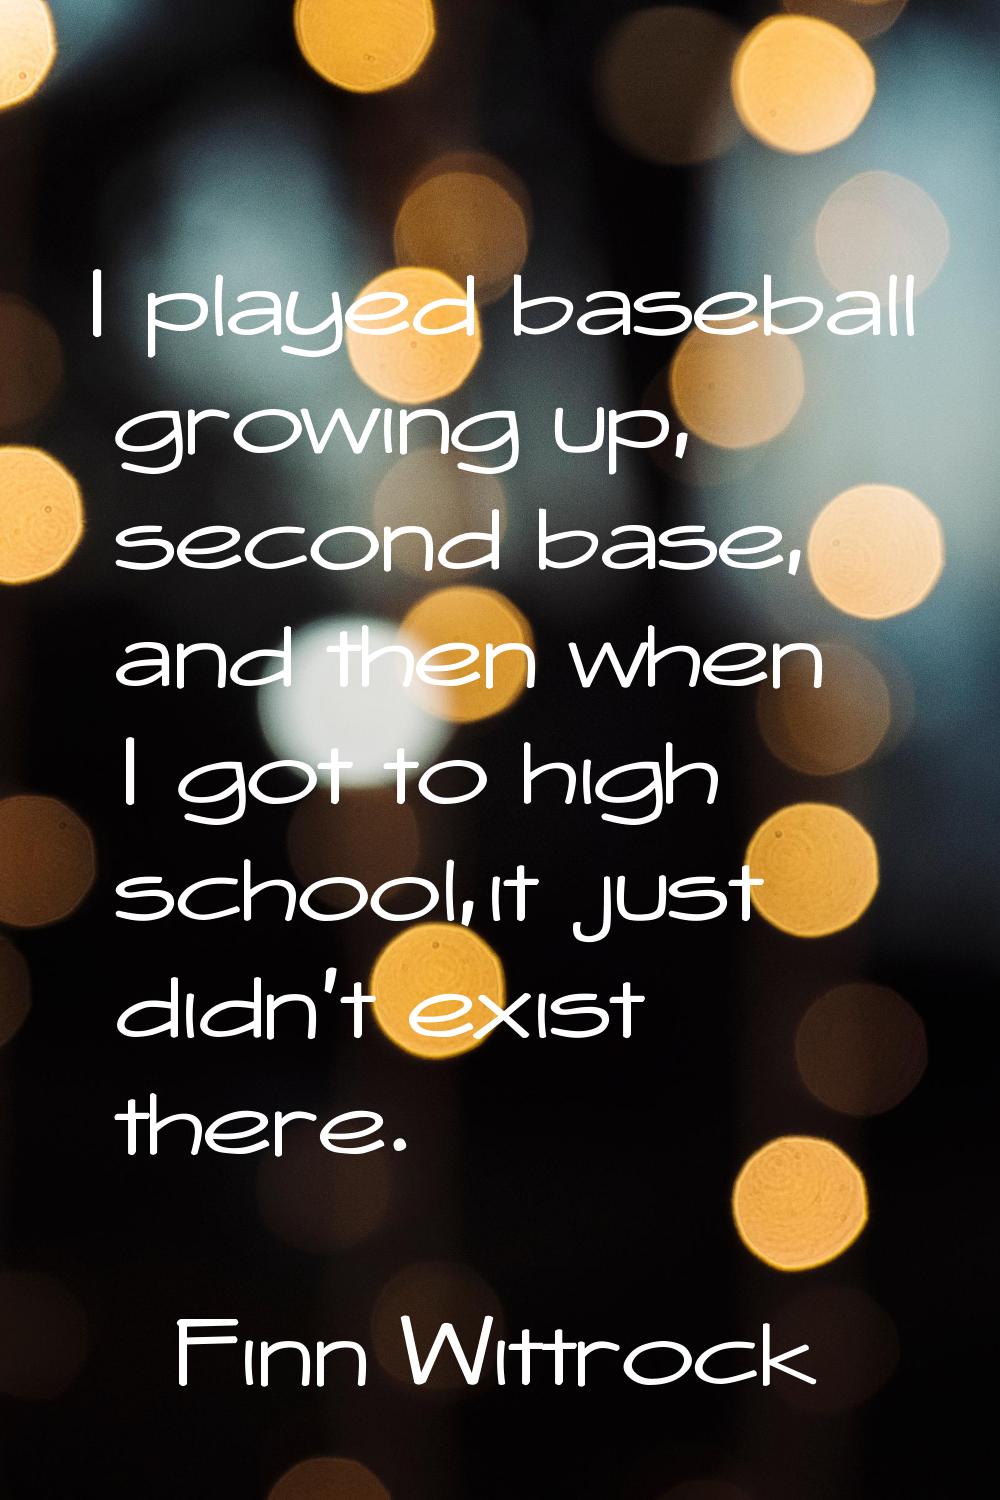 I played baseball growing up, second base, and then when I got to high school,it just didn't exist 